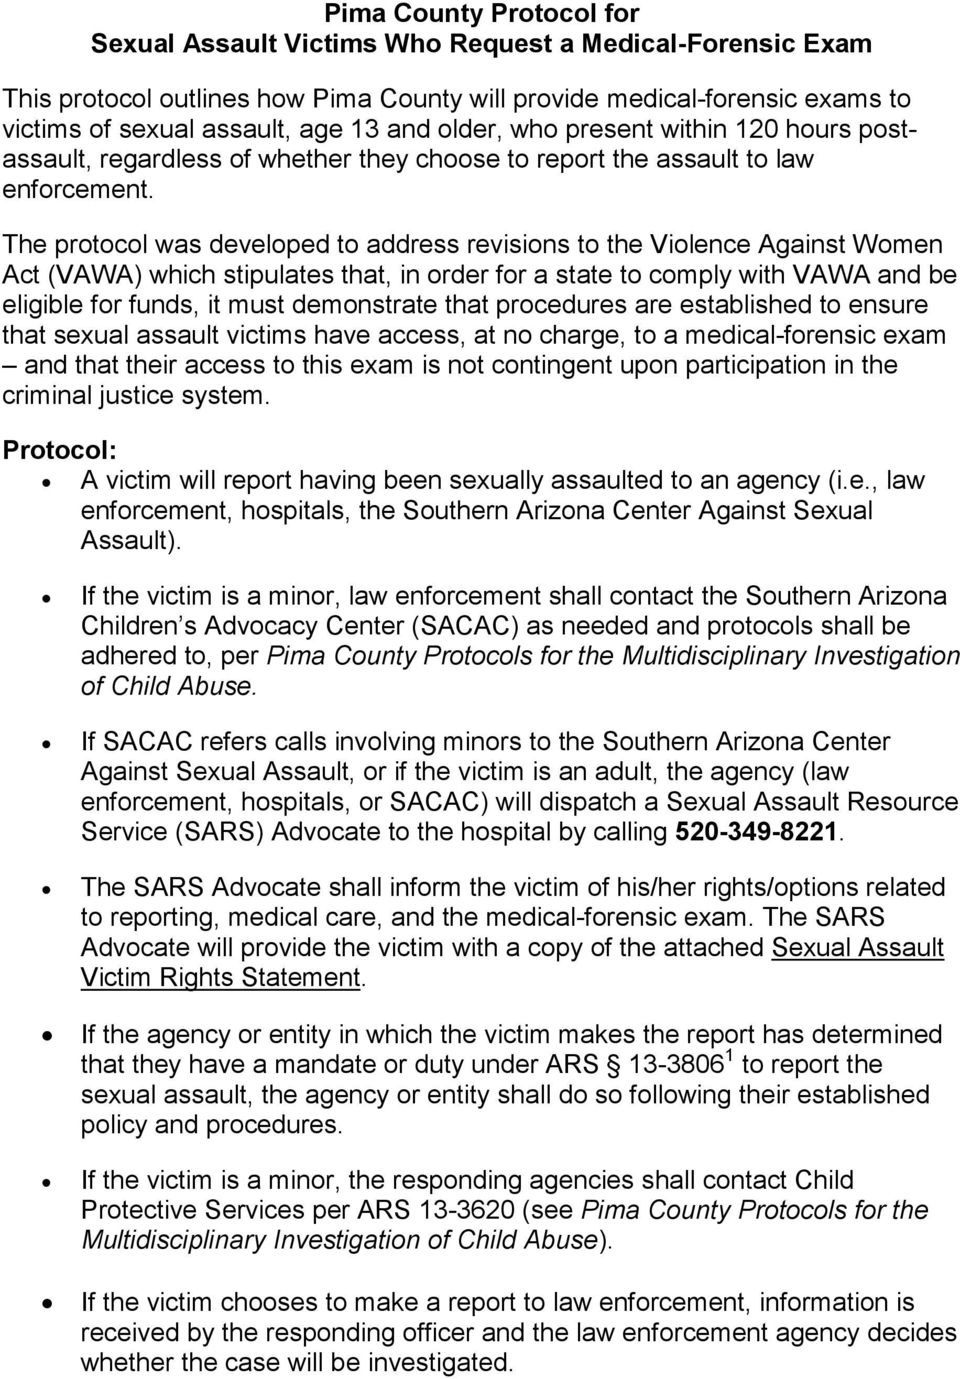 The protocol was developed to address revisions to the Violence Against Women Act (VAWA) which stipulates that, in order for a state to comply with VAWA and be eligible for funds, it must demonstrate